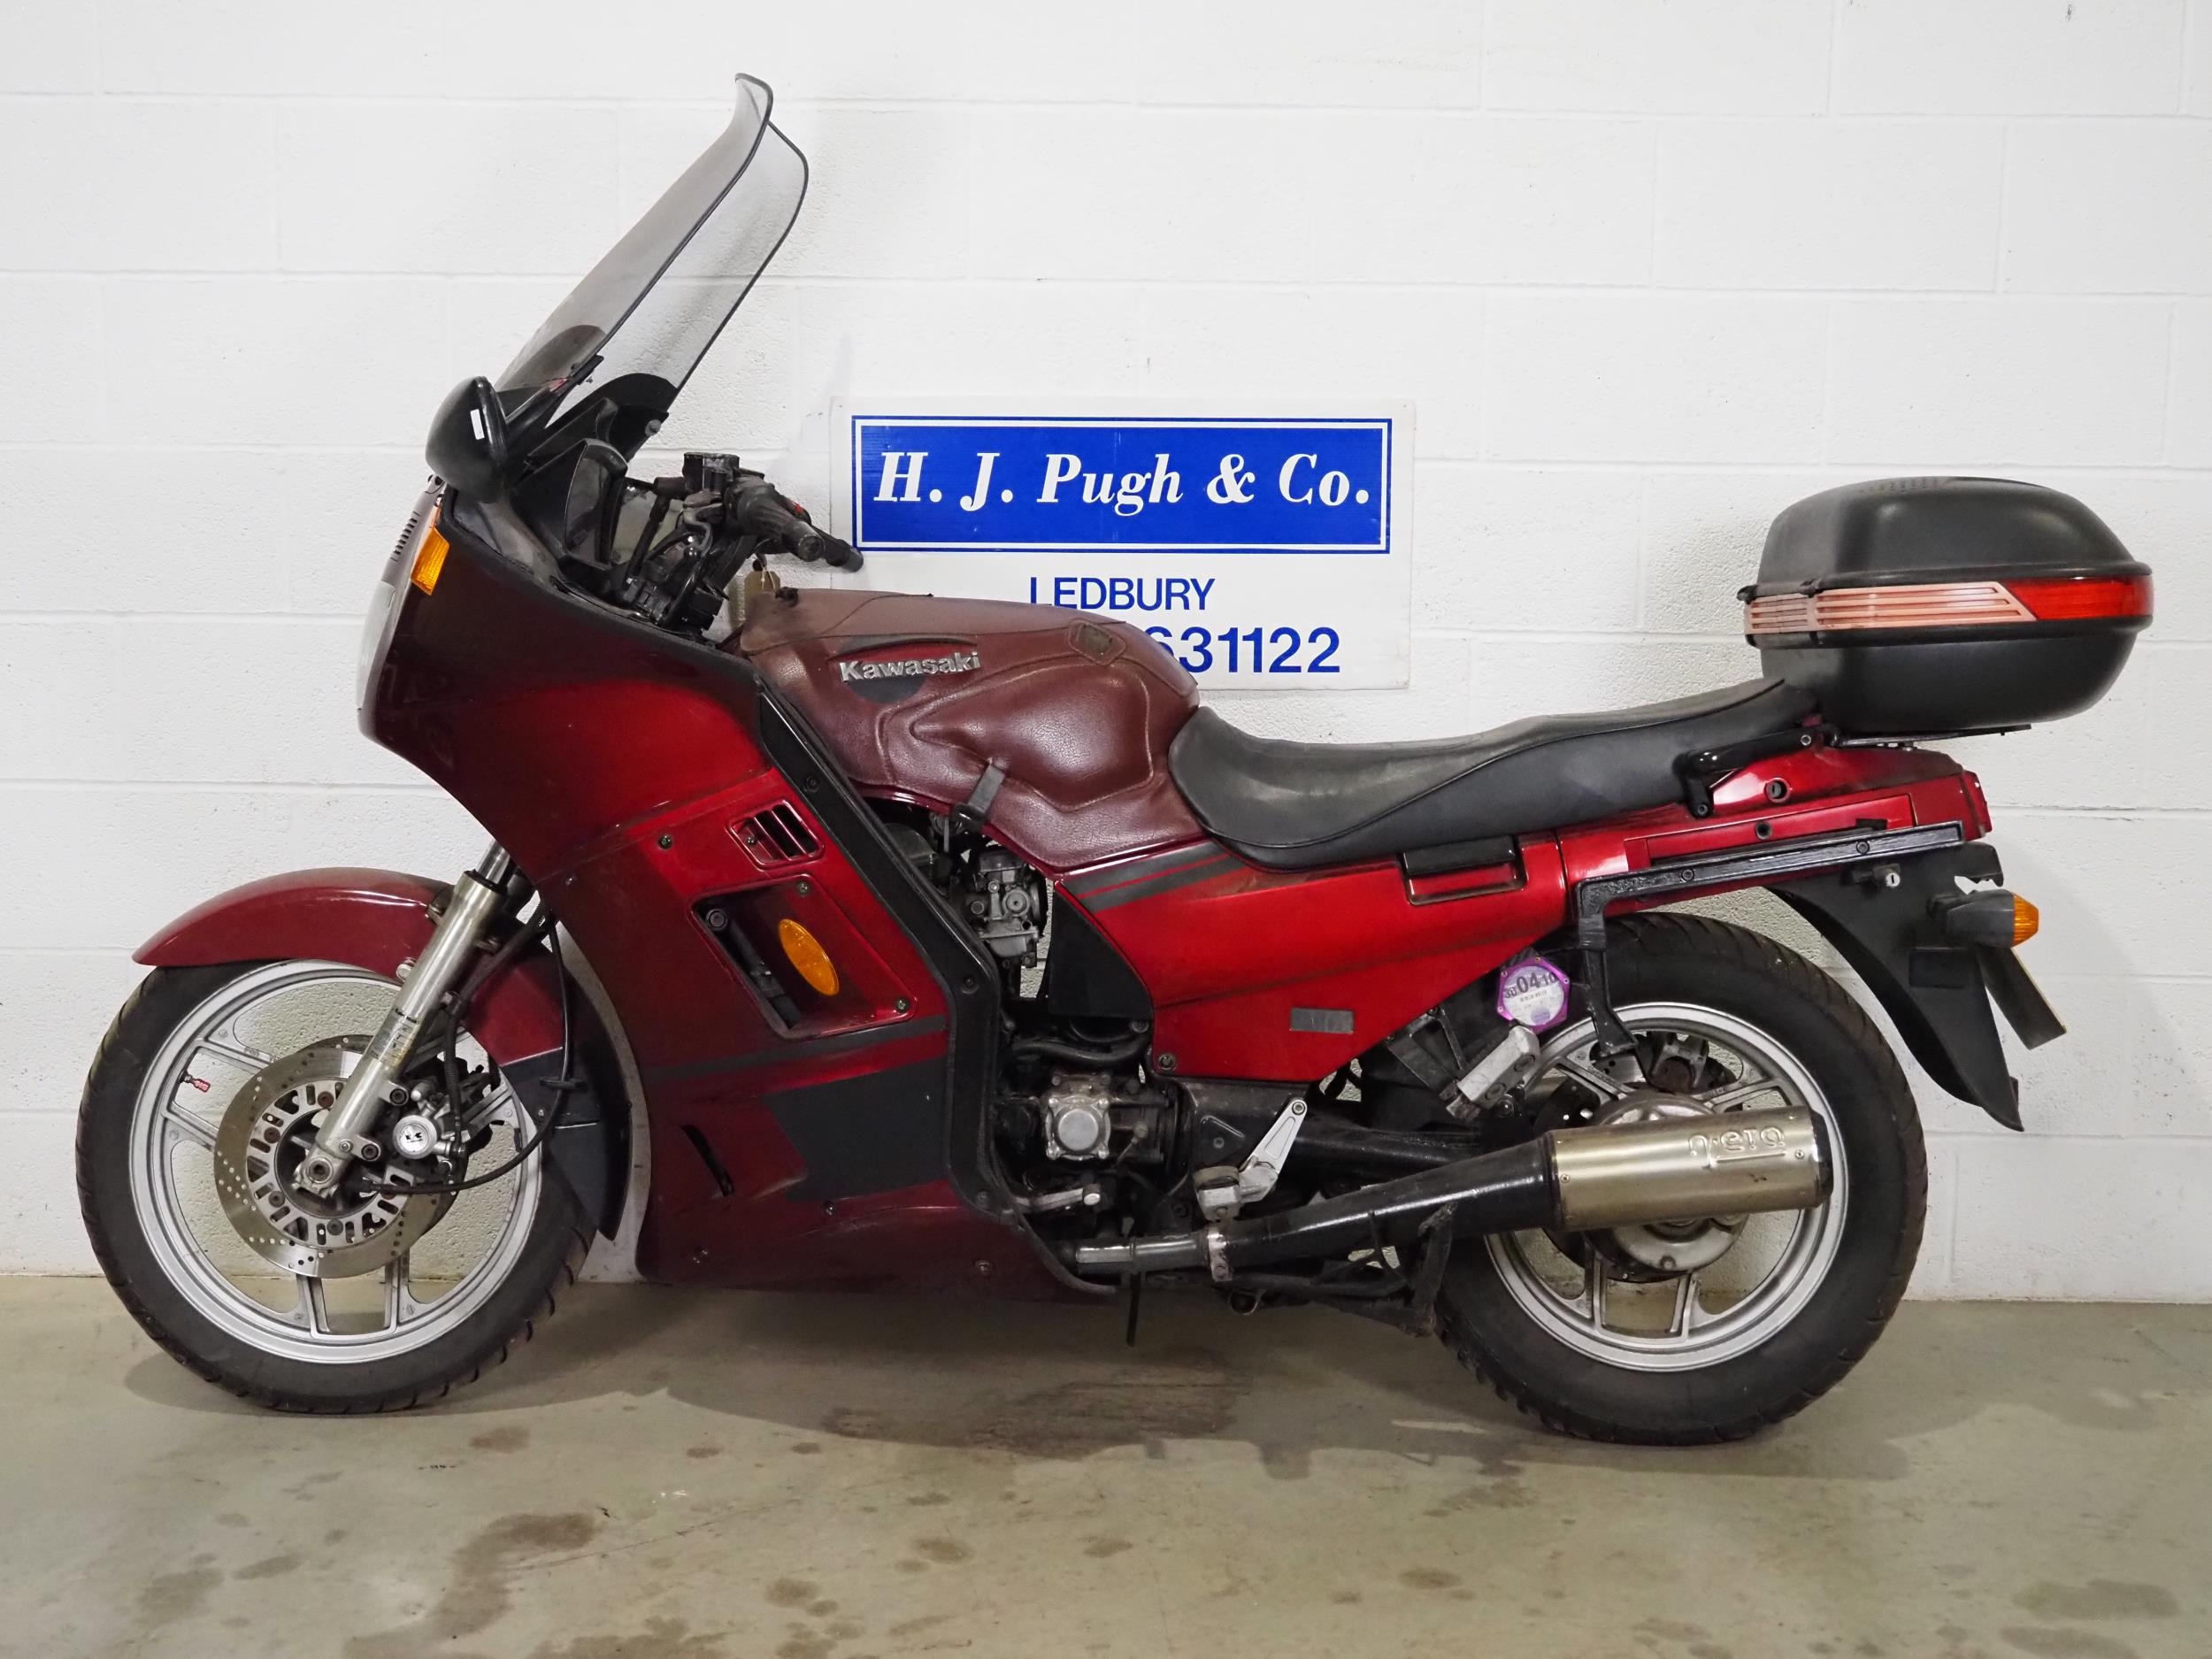 Kawasaki ZG 1000A1 motorcycle. 1986. 997cc. Has been stored for some time so will need - Image 5 of 5